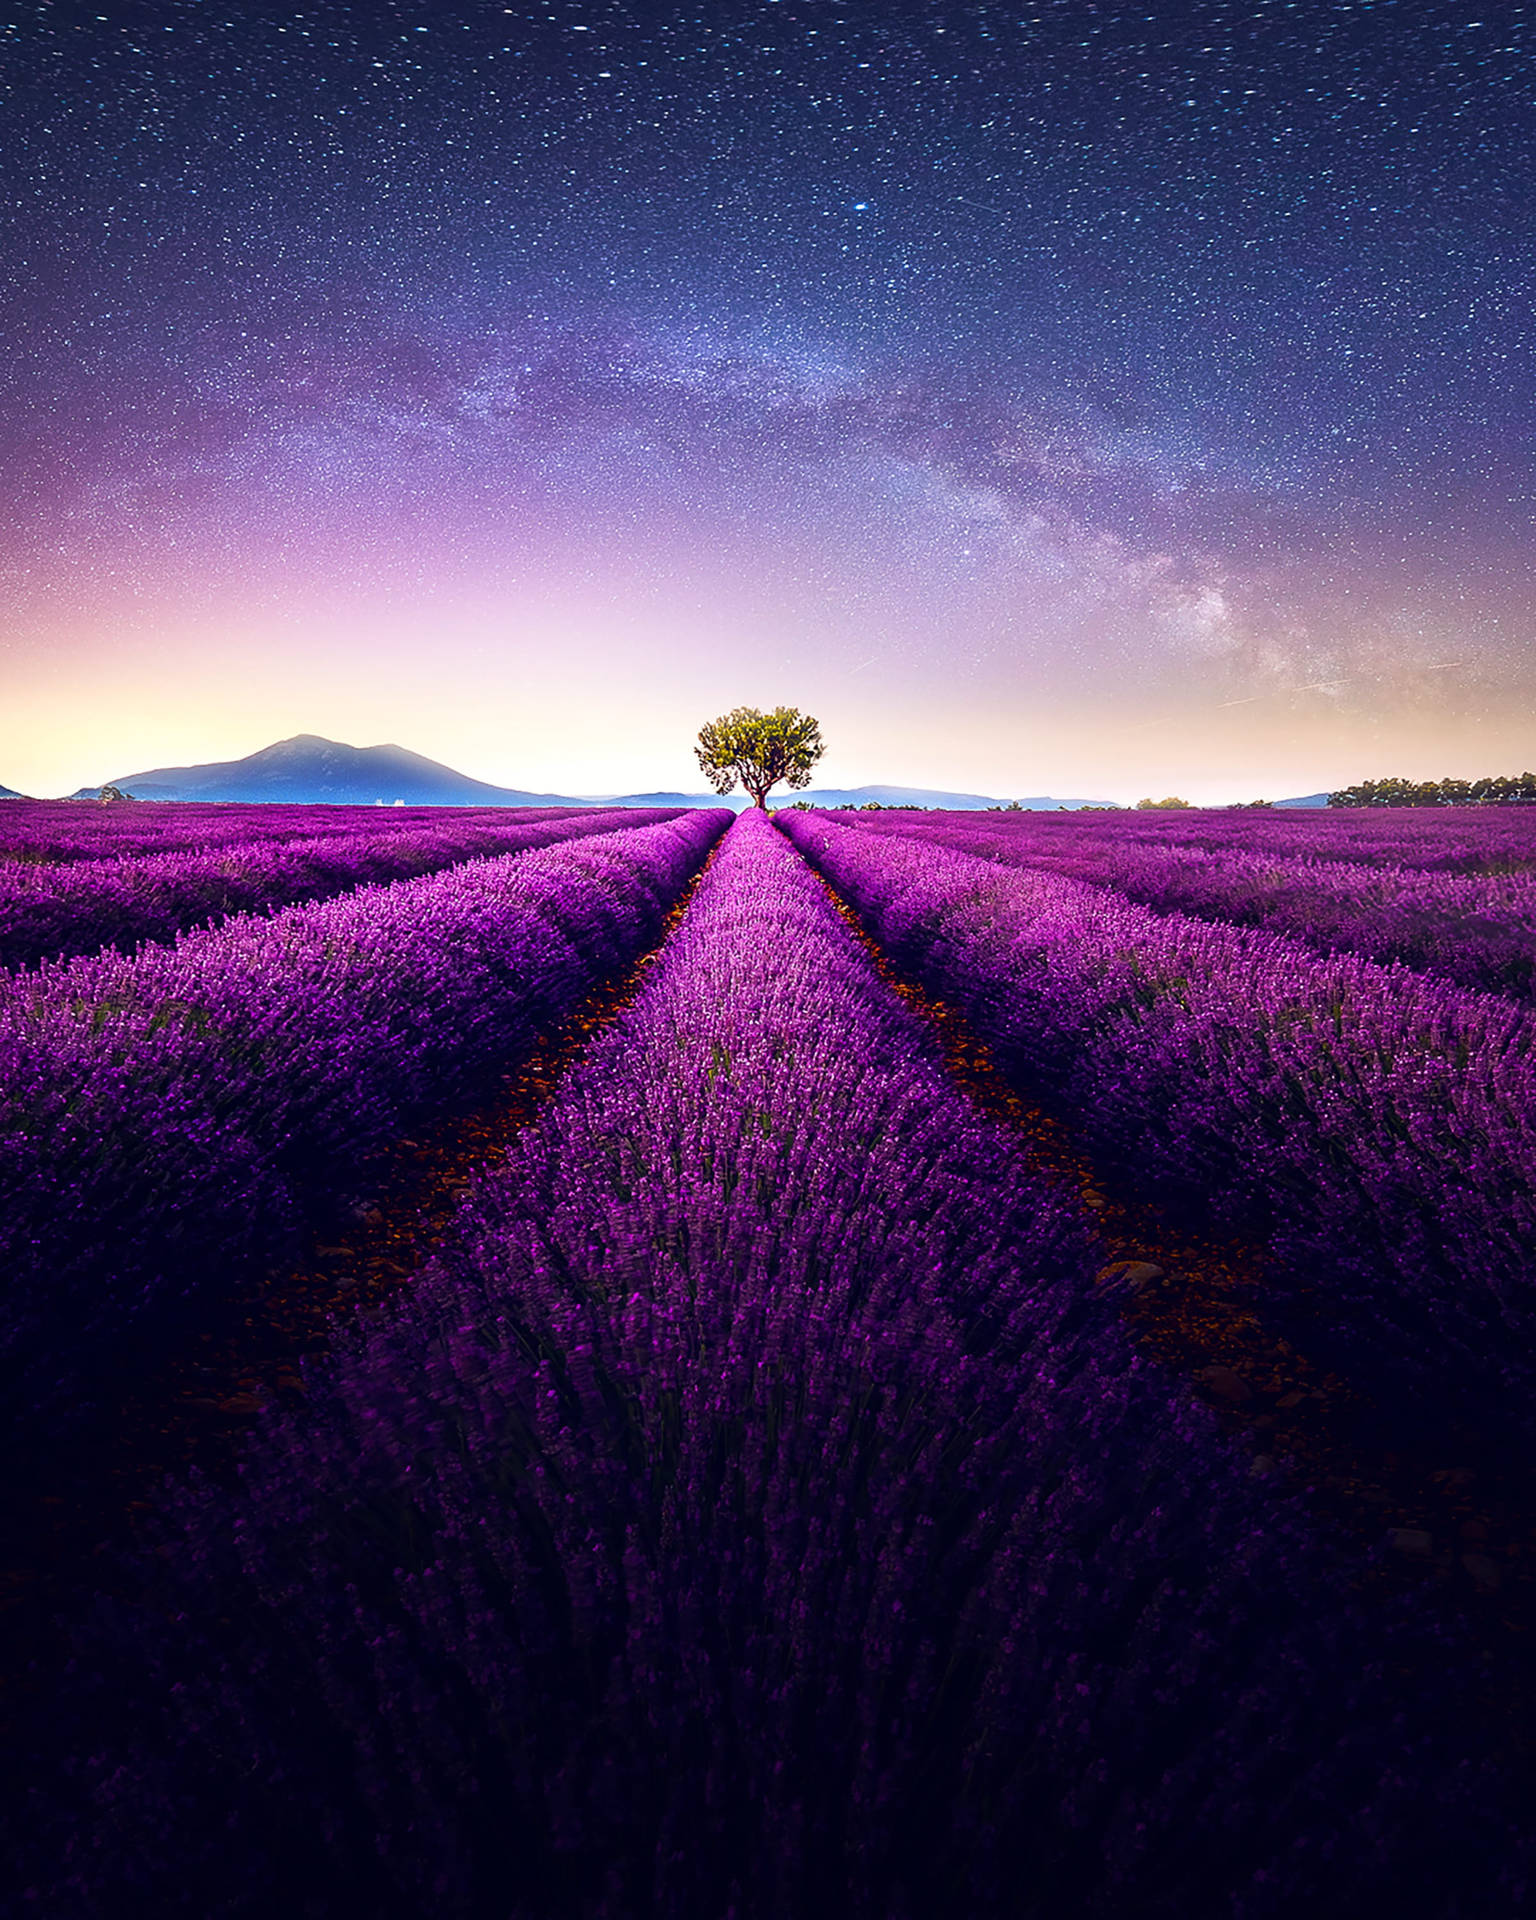 A serene iPhone Landscape showing a blooming lavender field under a vibrant blue sky. Wallpaper